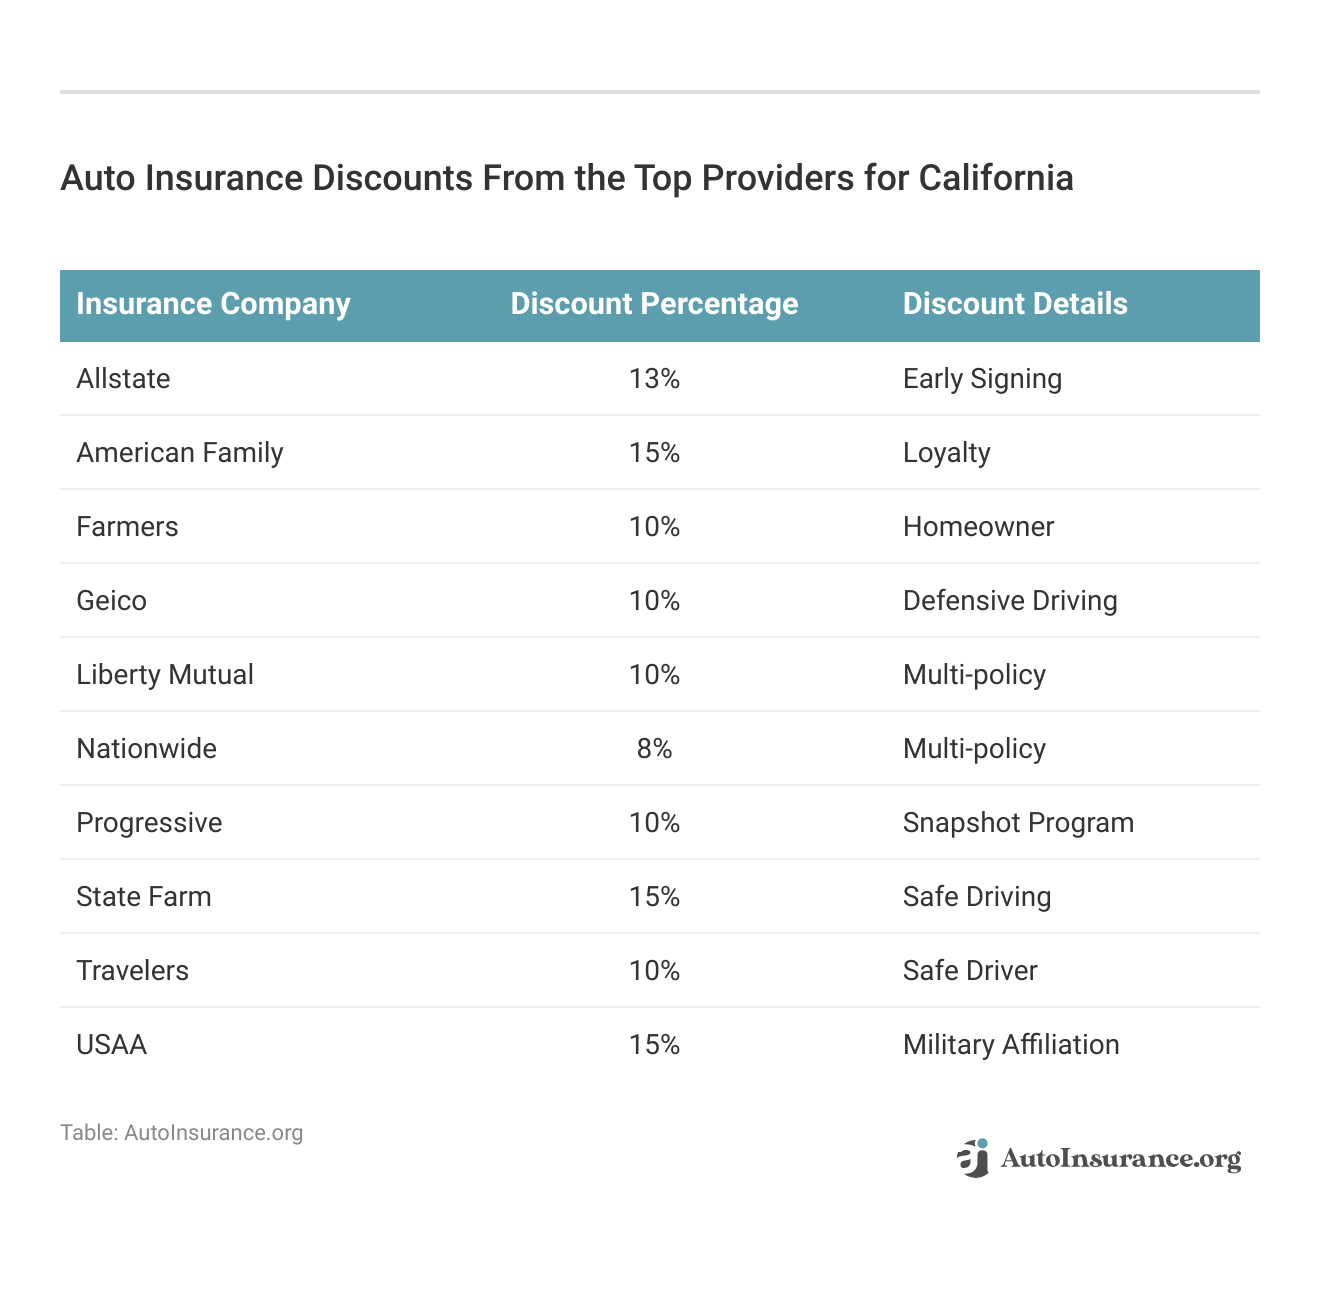 <h3>Auto Insurance Discounts From the Top Providers for California</h3>